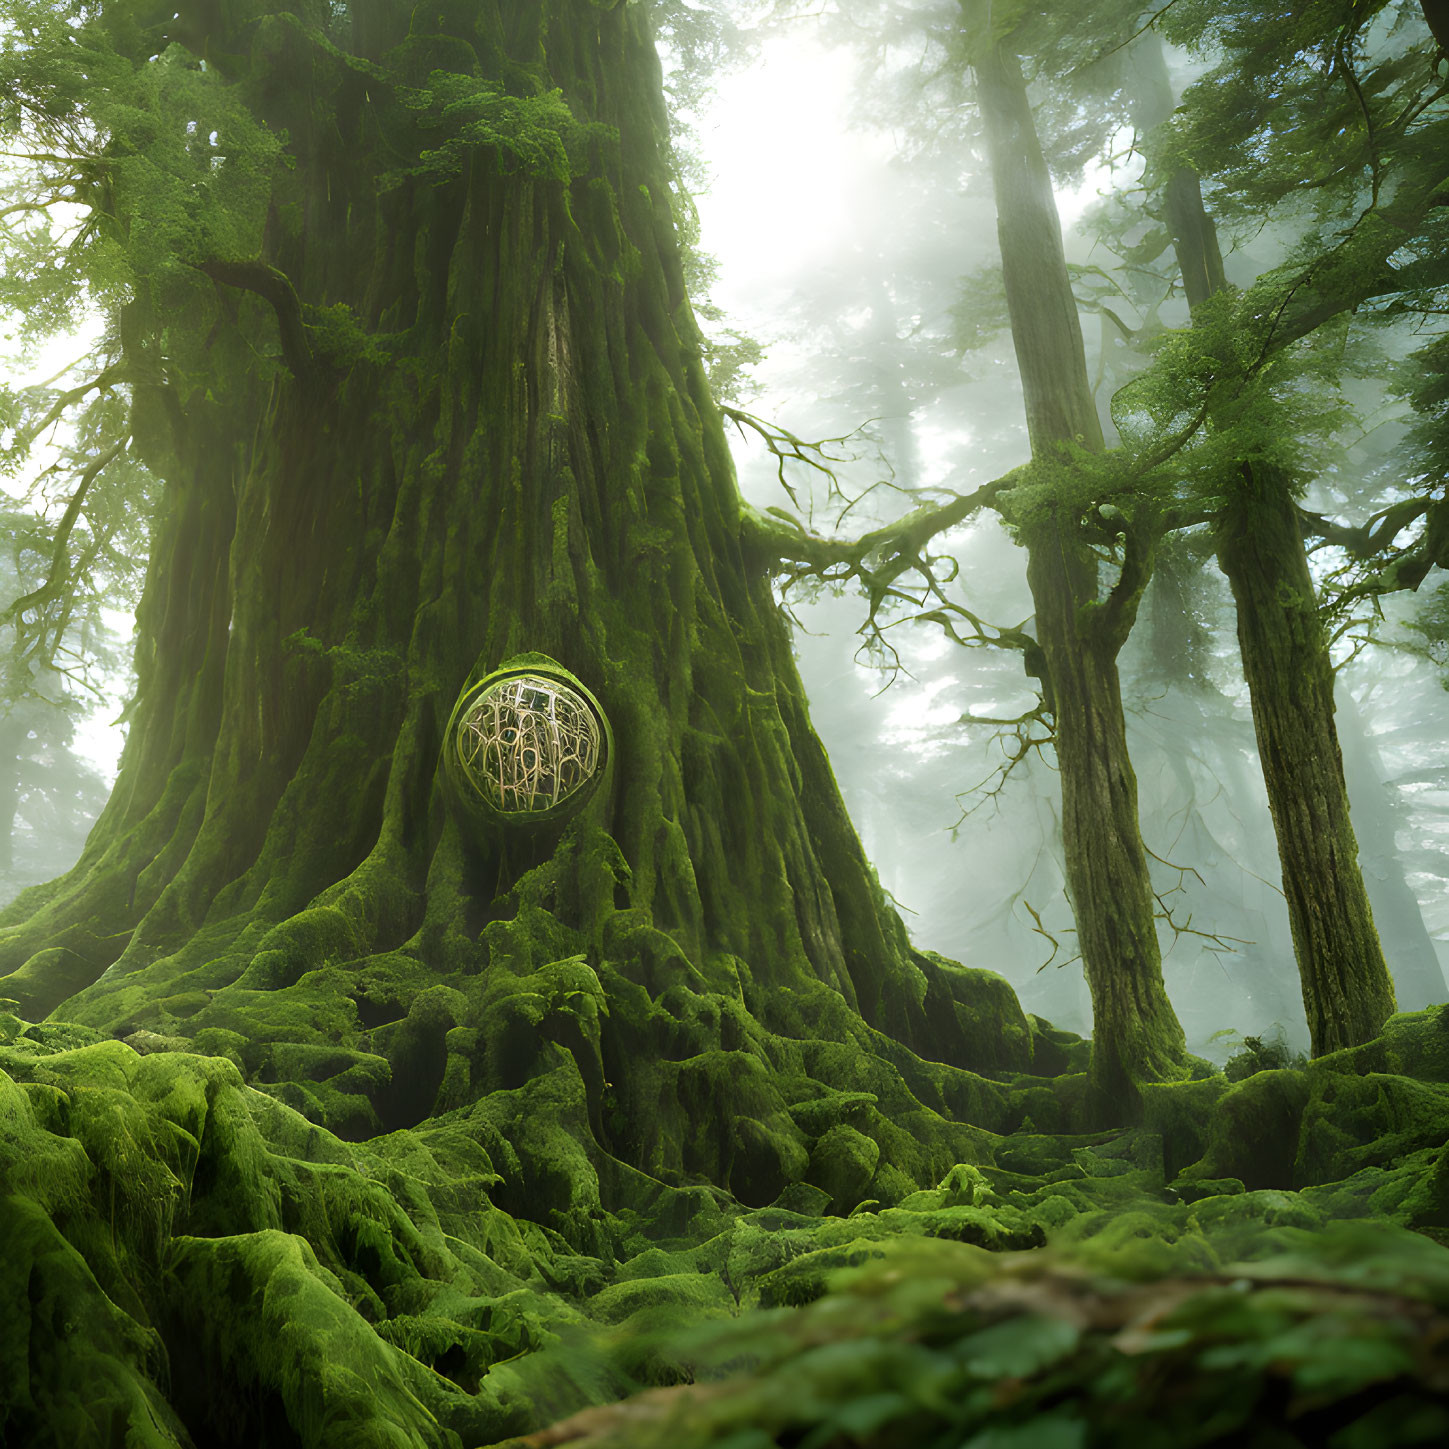 Mystical green forest with moss-covered tree trunk and circular window